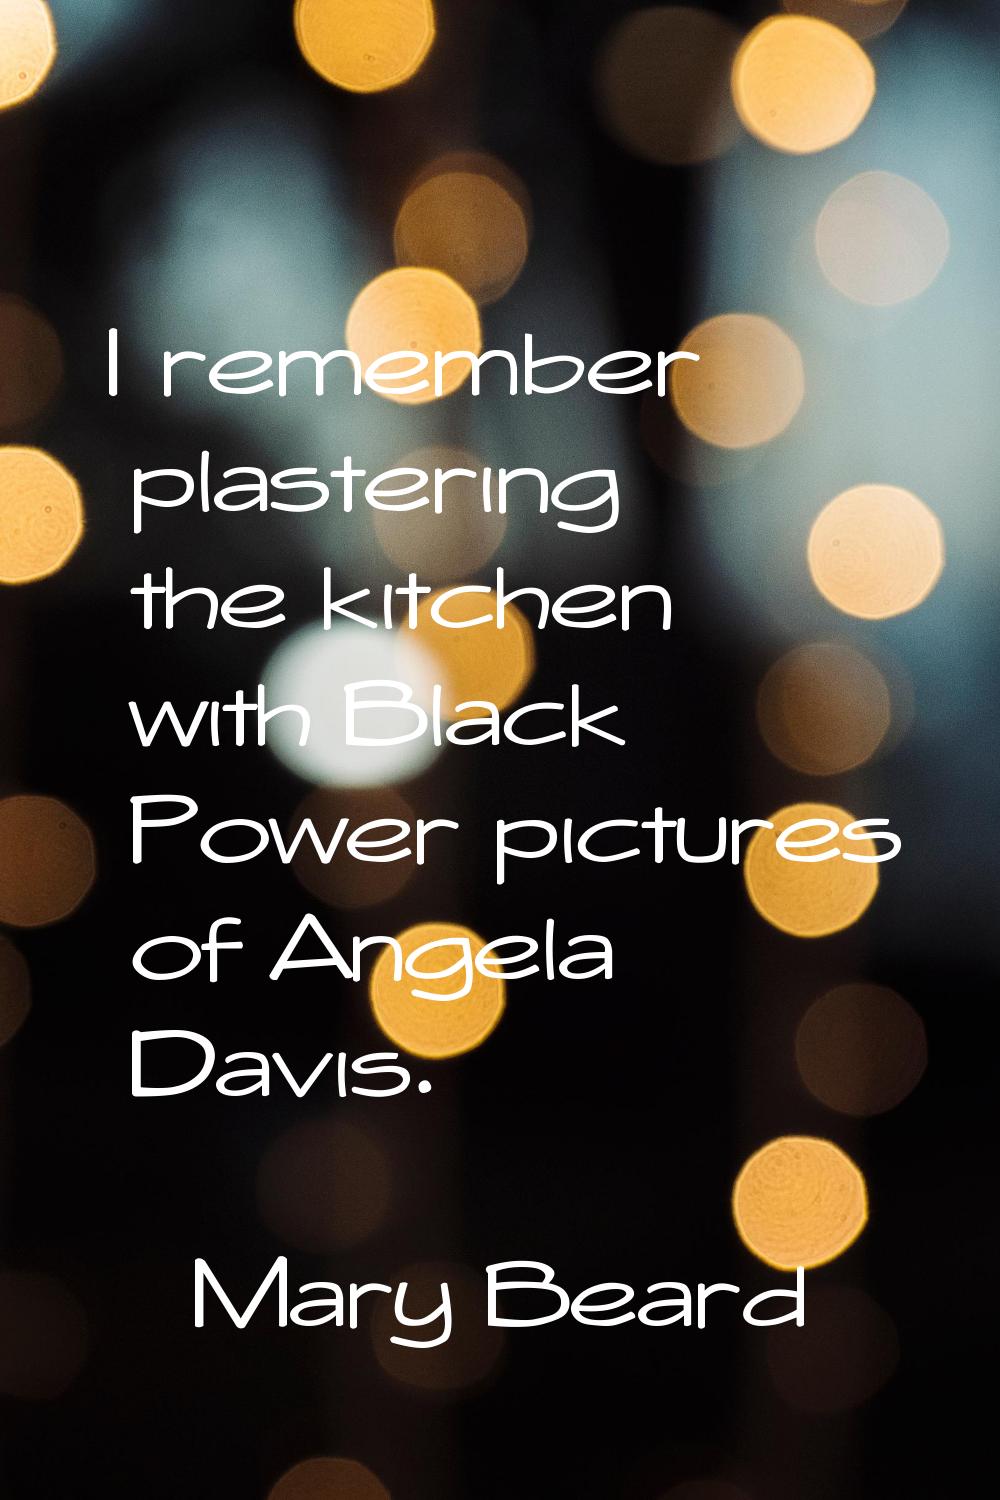 I remember plastering the kitchen with Black Power pictures of Angela Davis.